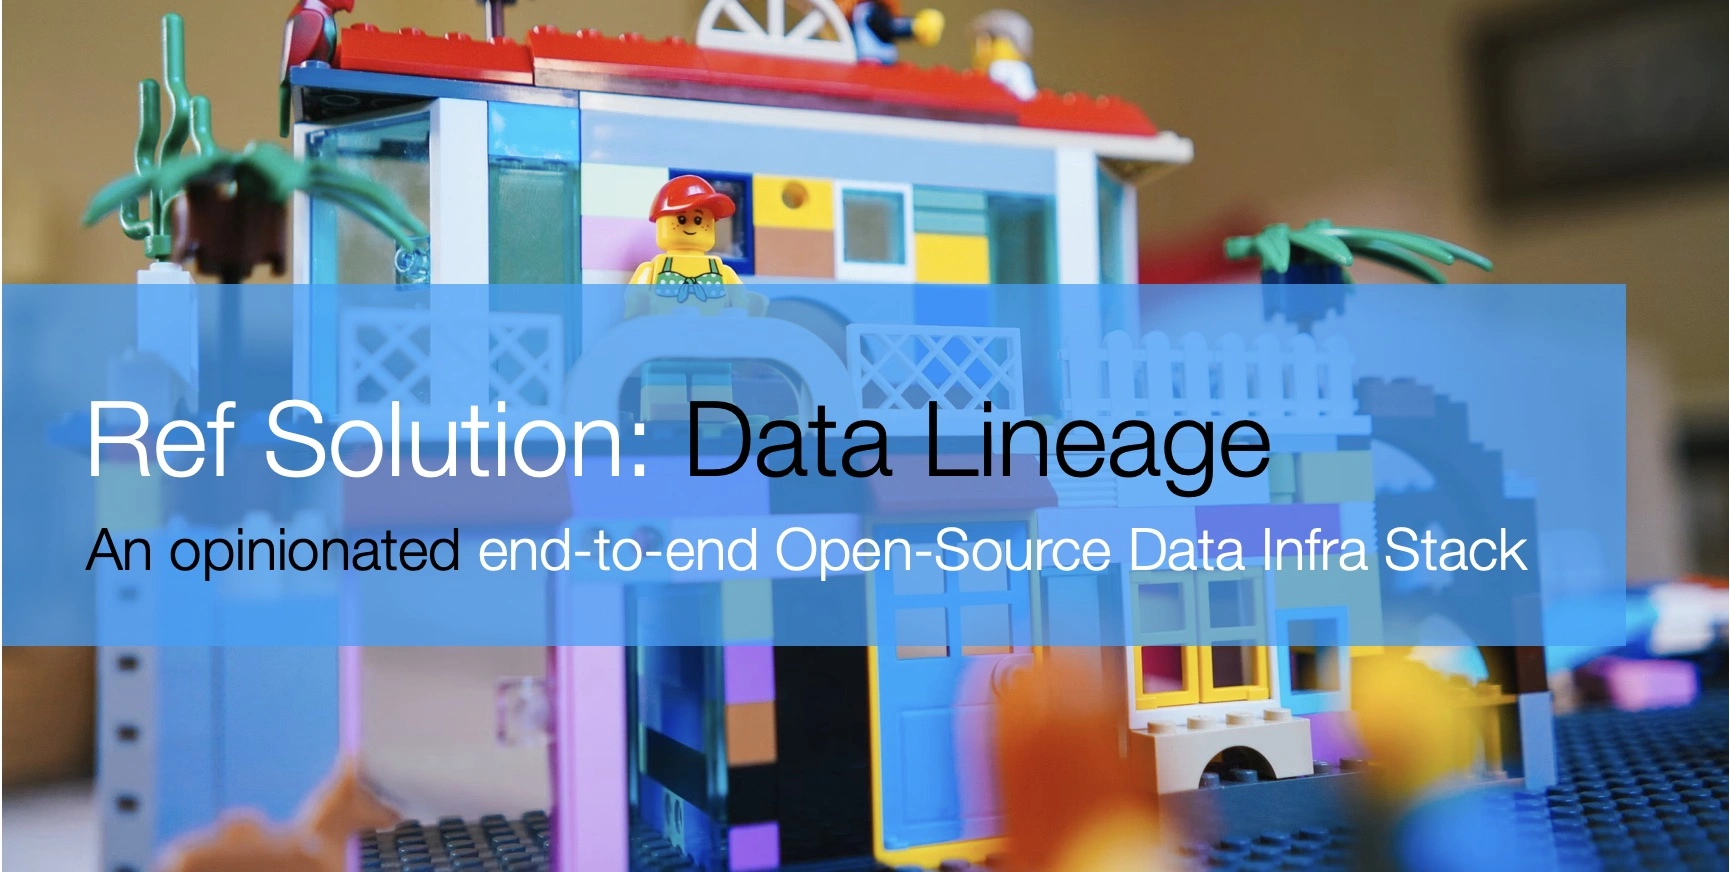 I would like to share my opinionated reference data infra stack with some of those best open-source projects with modern ETL, Dashboard, Metadata Governance, and Data Lineage Management.